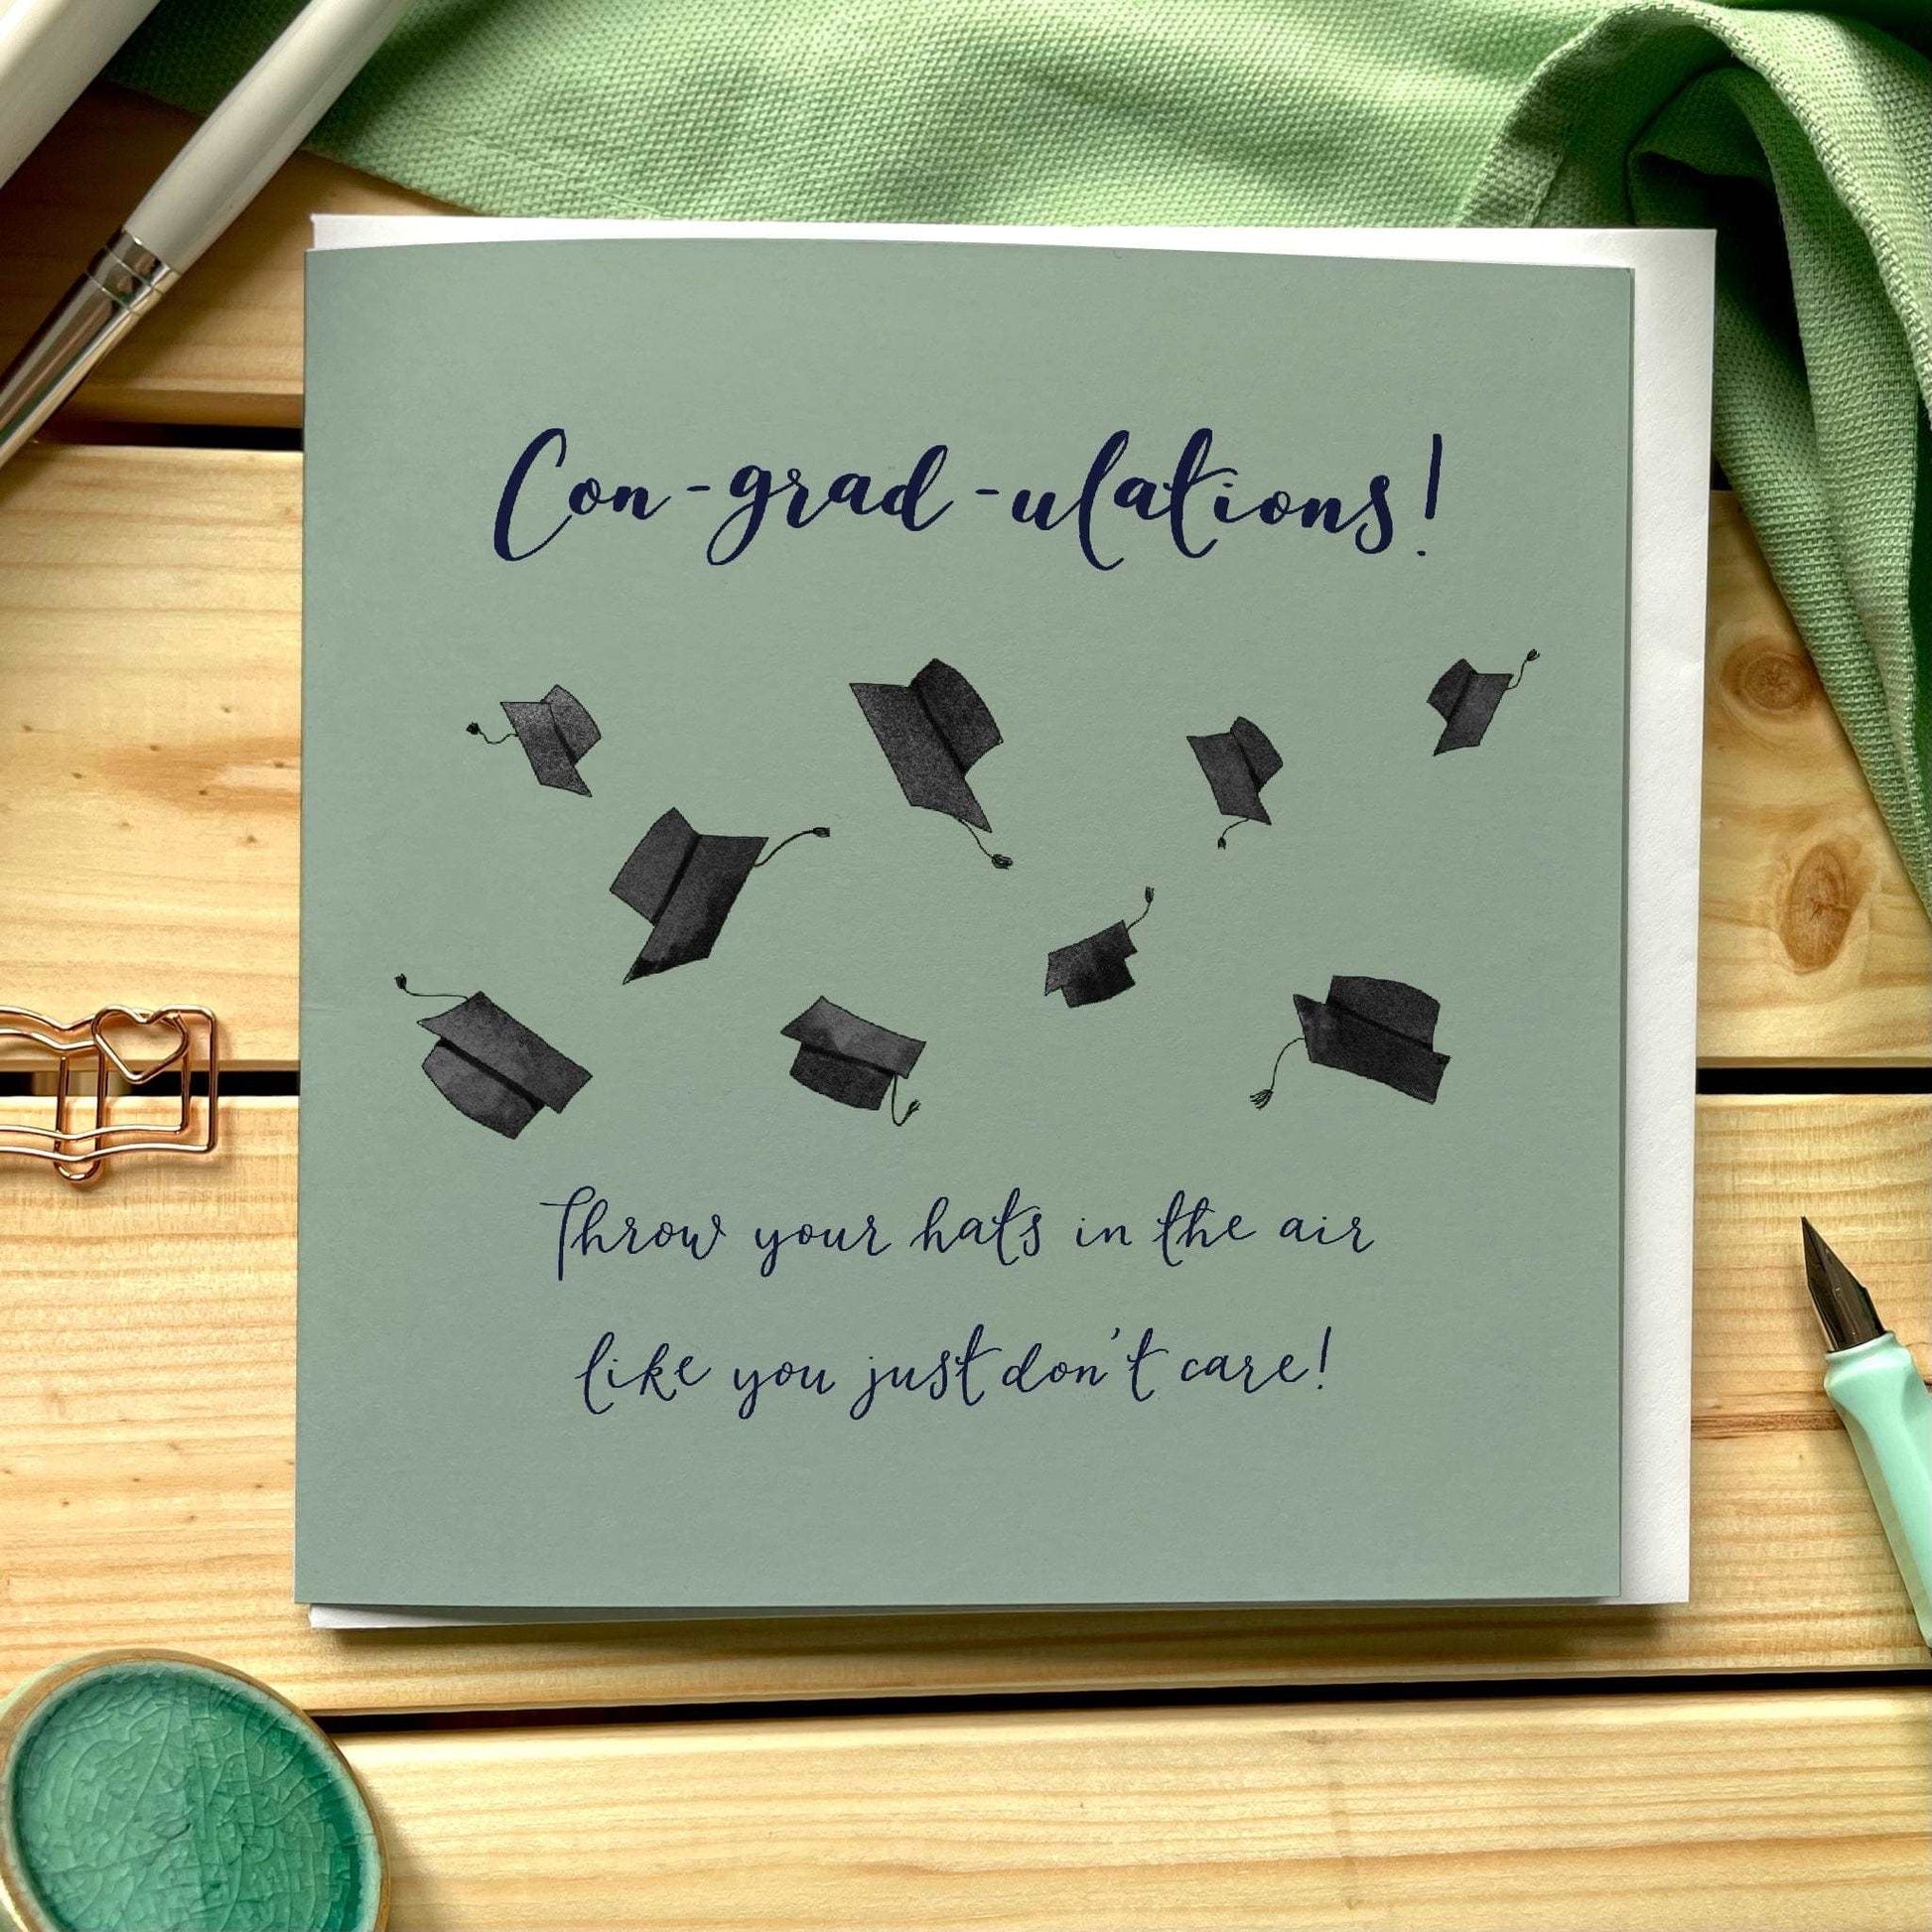 Graduation card - con-grad-ulations And Hope Designs Cards